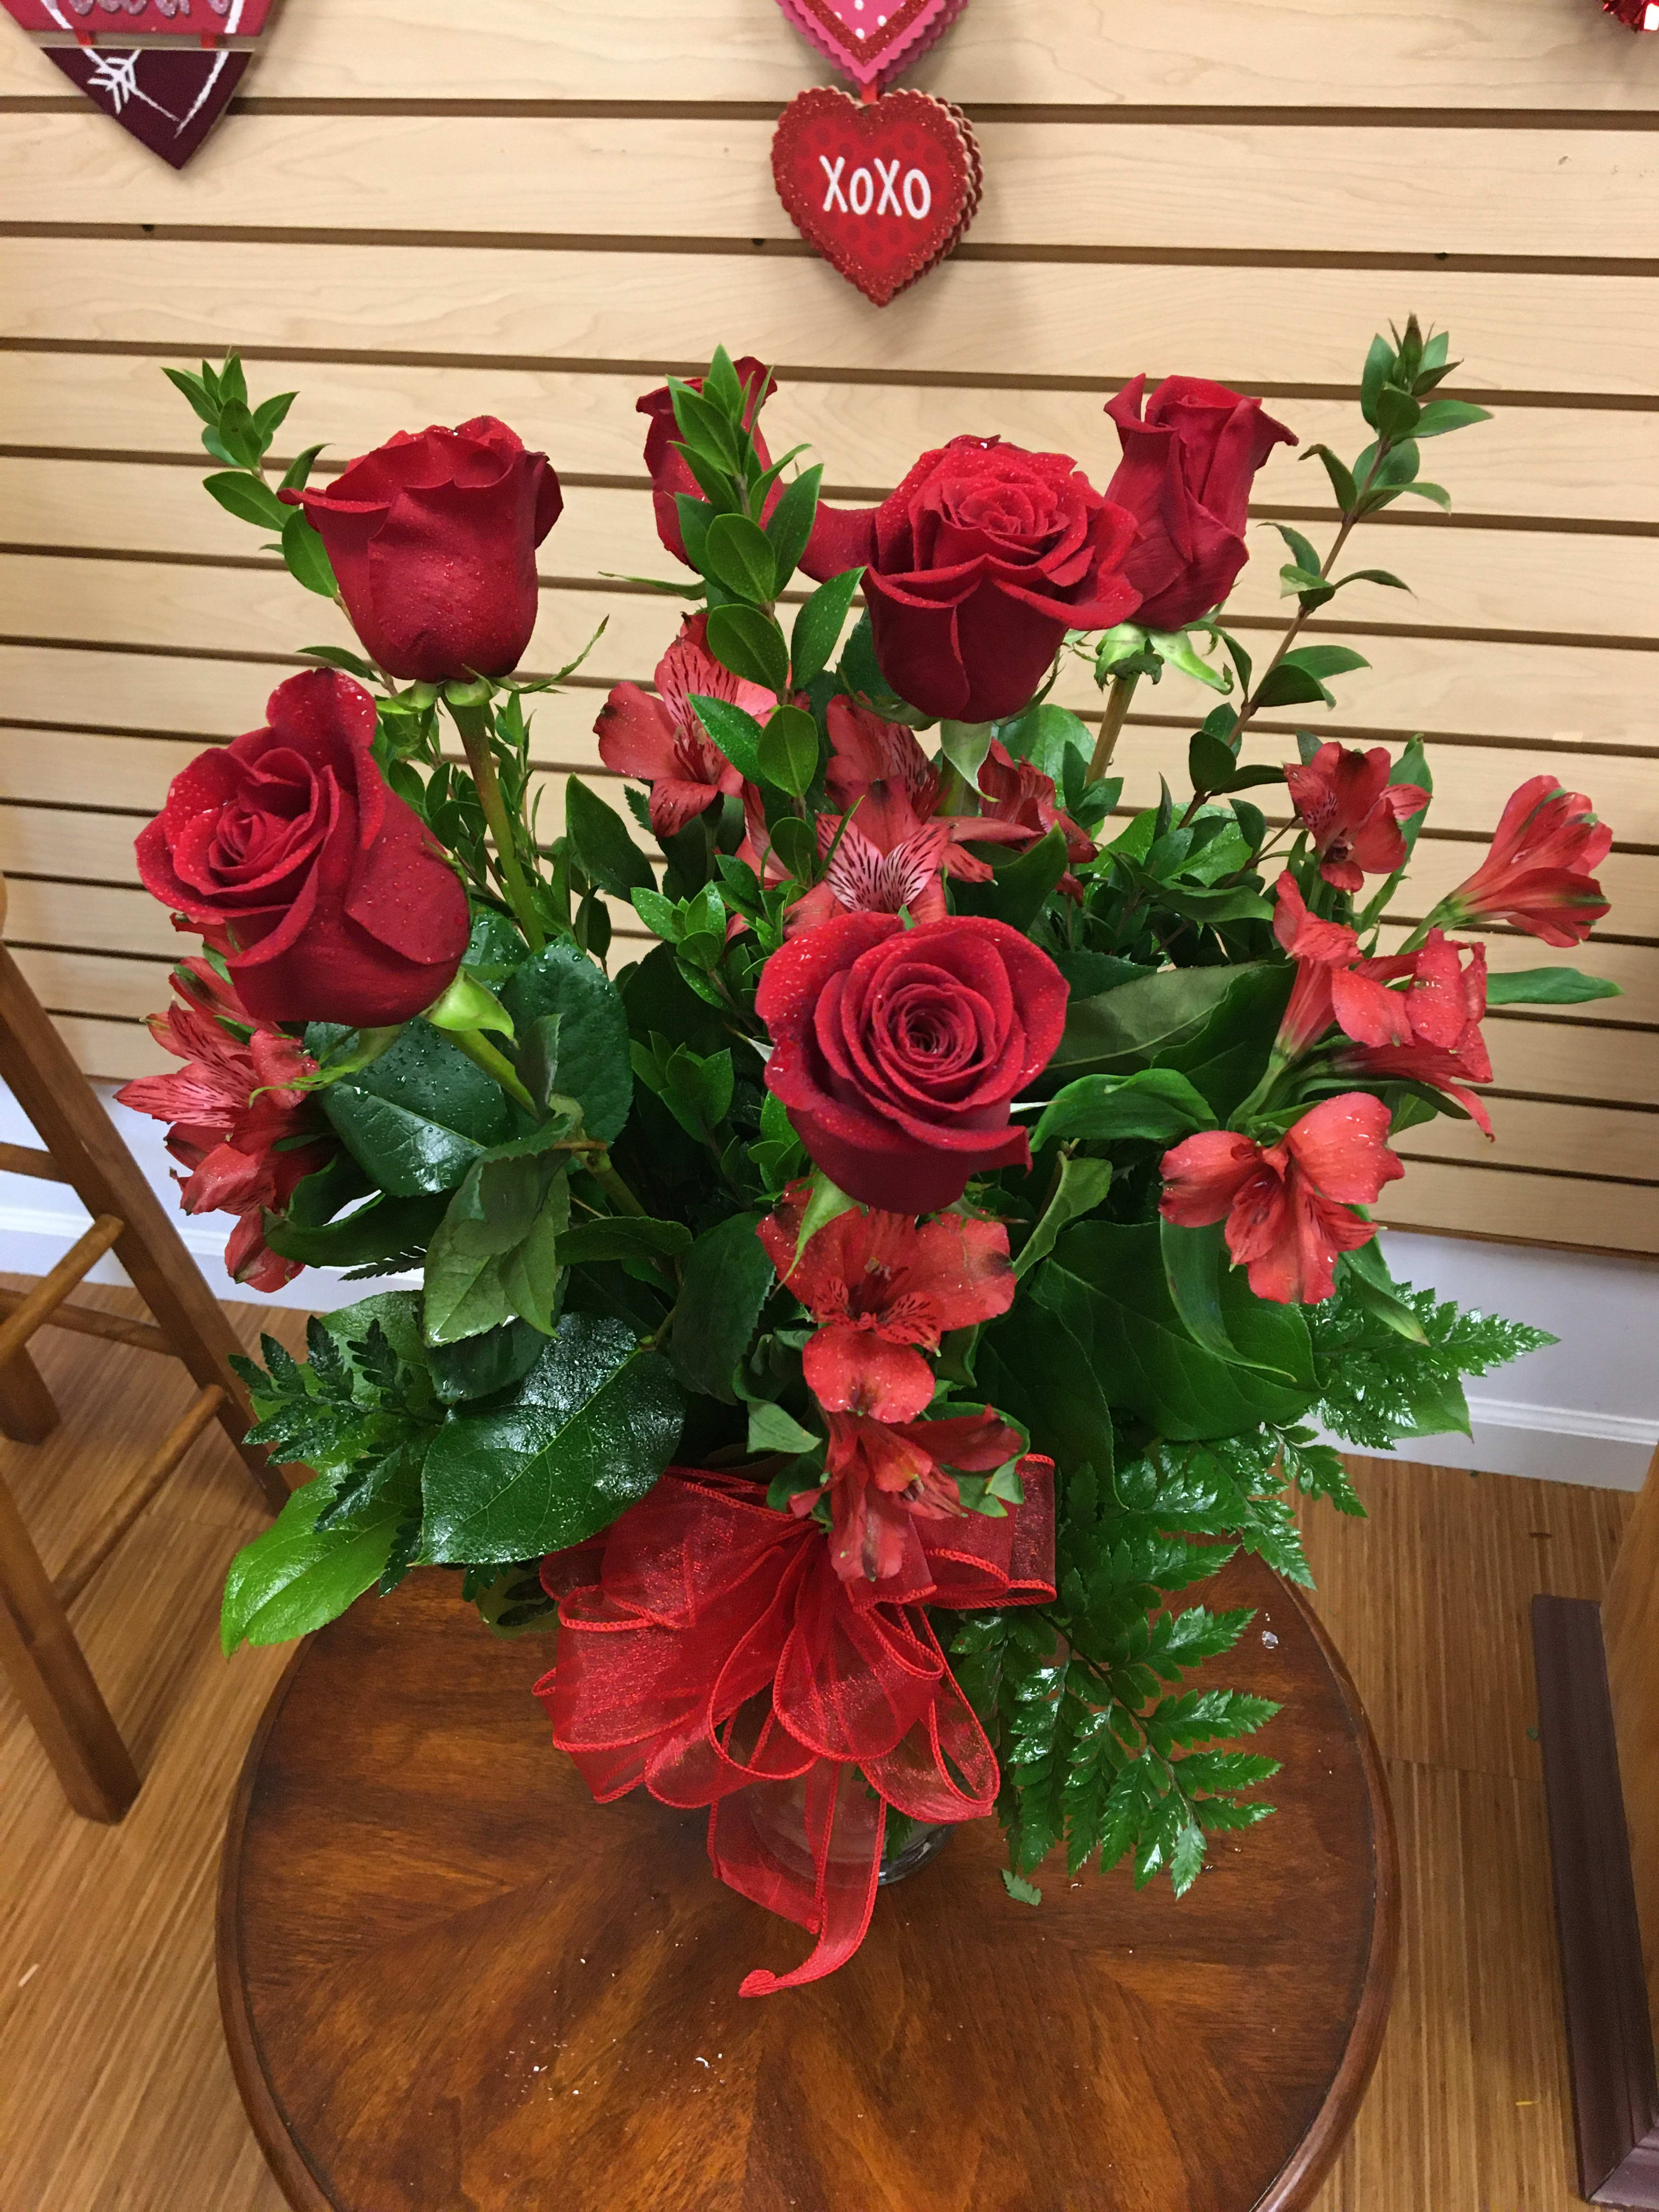 6 Red Roses with Alstroemeria - Red roses accented with red alstroemeria in a vase